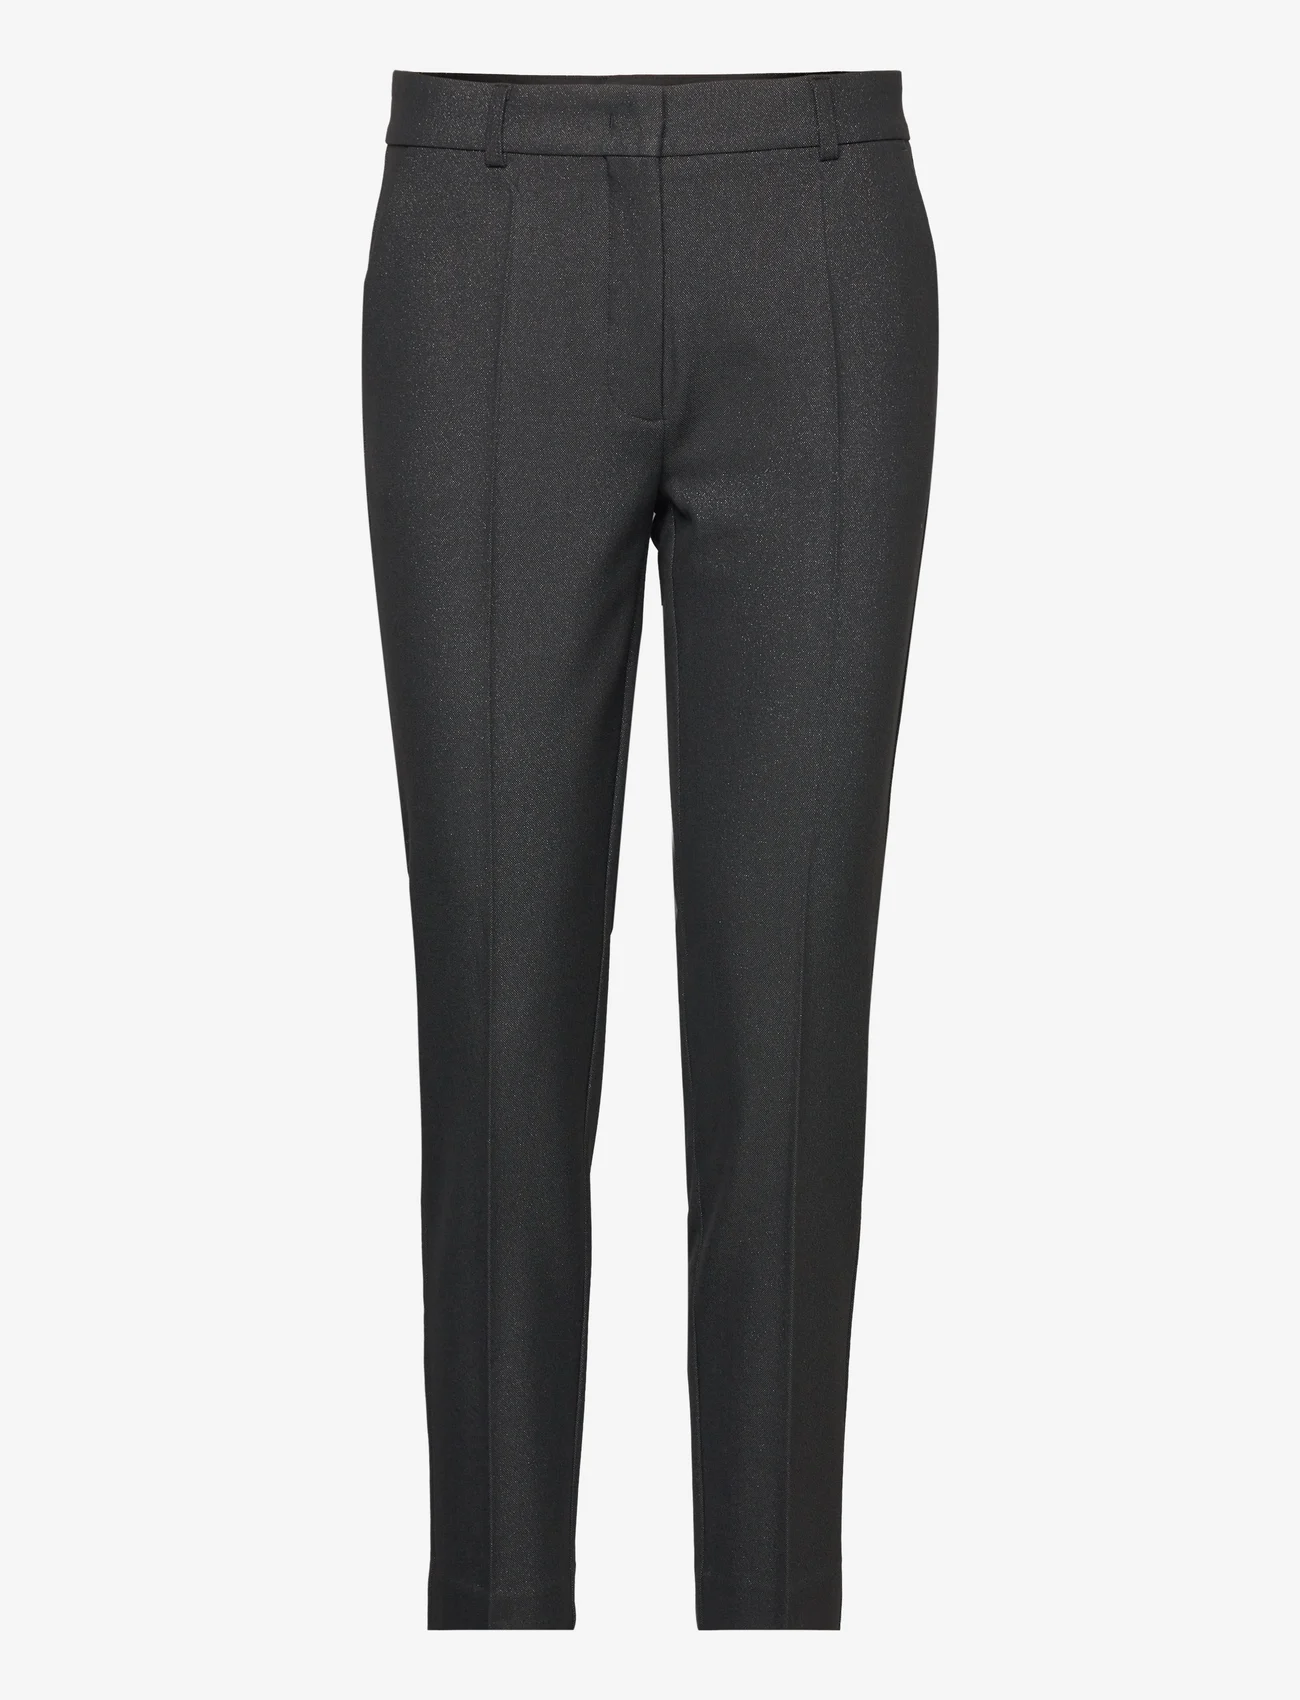 Andiata - Jamy trousers - tailored trousers - sparkling black - 0